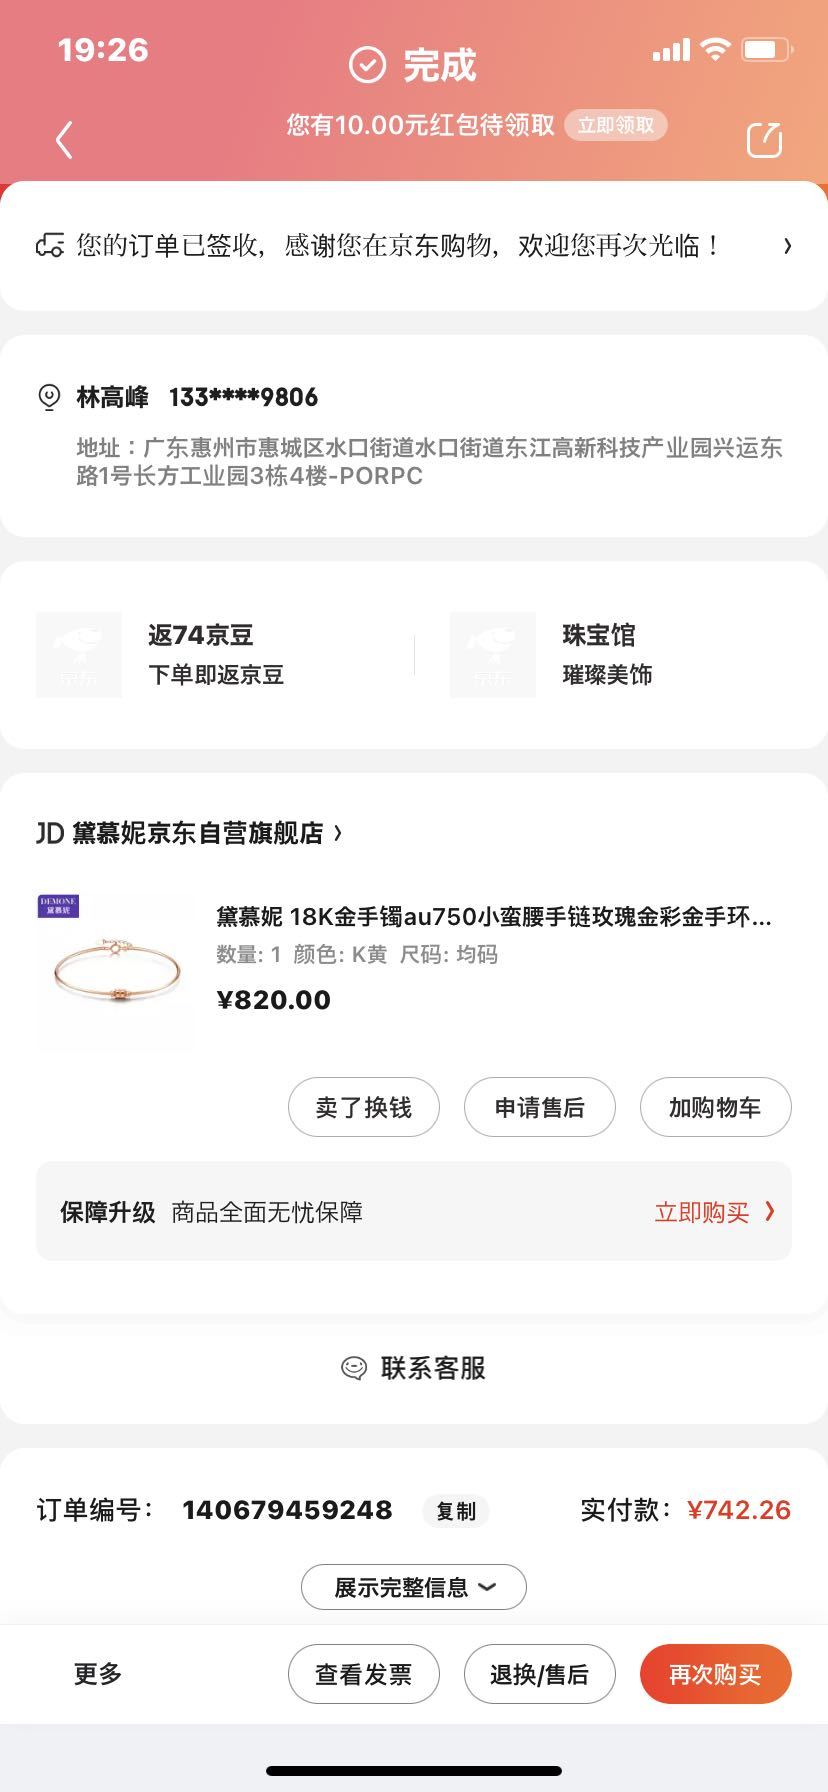 https://img1.superbuy.com/images/consult/2021/04/02/d7e251f8eac74a19be5b7762dd7acd81.jpg?x-oss-process=image/resize,w_950